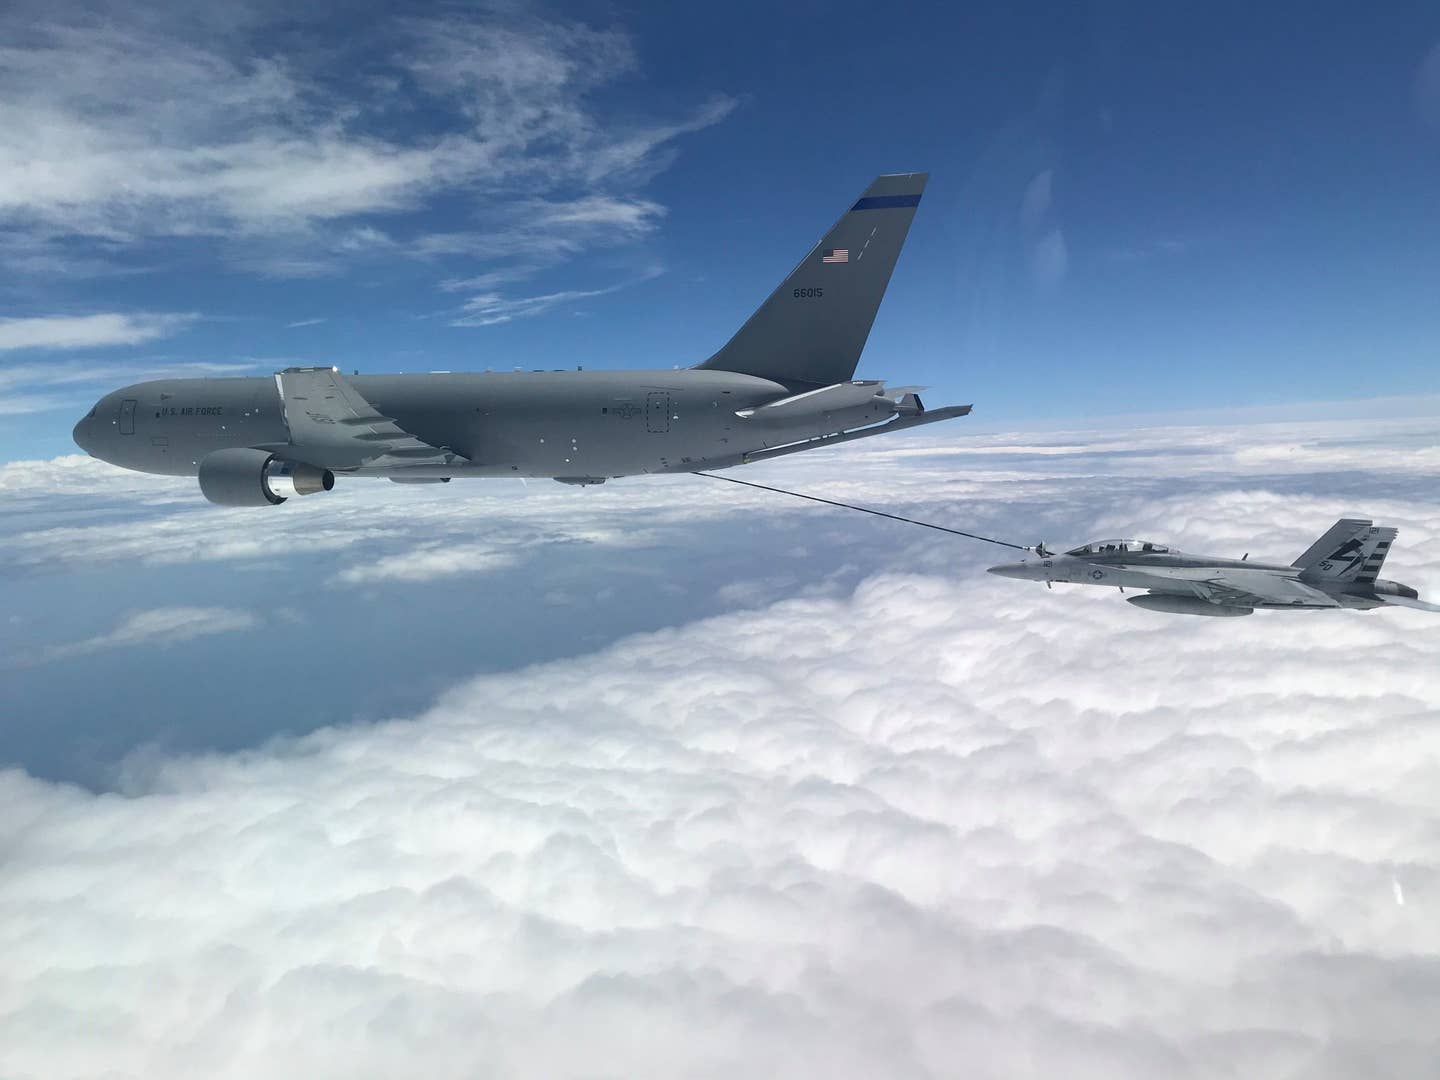 A KC-46A refuels a U.S. Navy F/A-18F Super Hornet off the coast of Maryland, July 1, 2020. This marked the first time the aircrew utilized the KC-46A centerline drogue system to refuel an aircraft. <em>U.S. Navy photo by Lt. Zach Fisher</em>